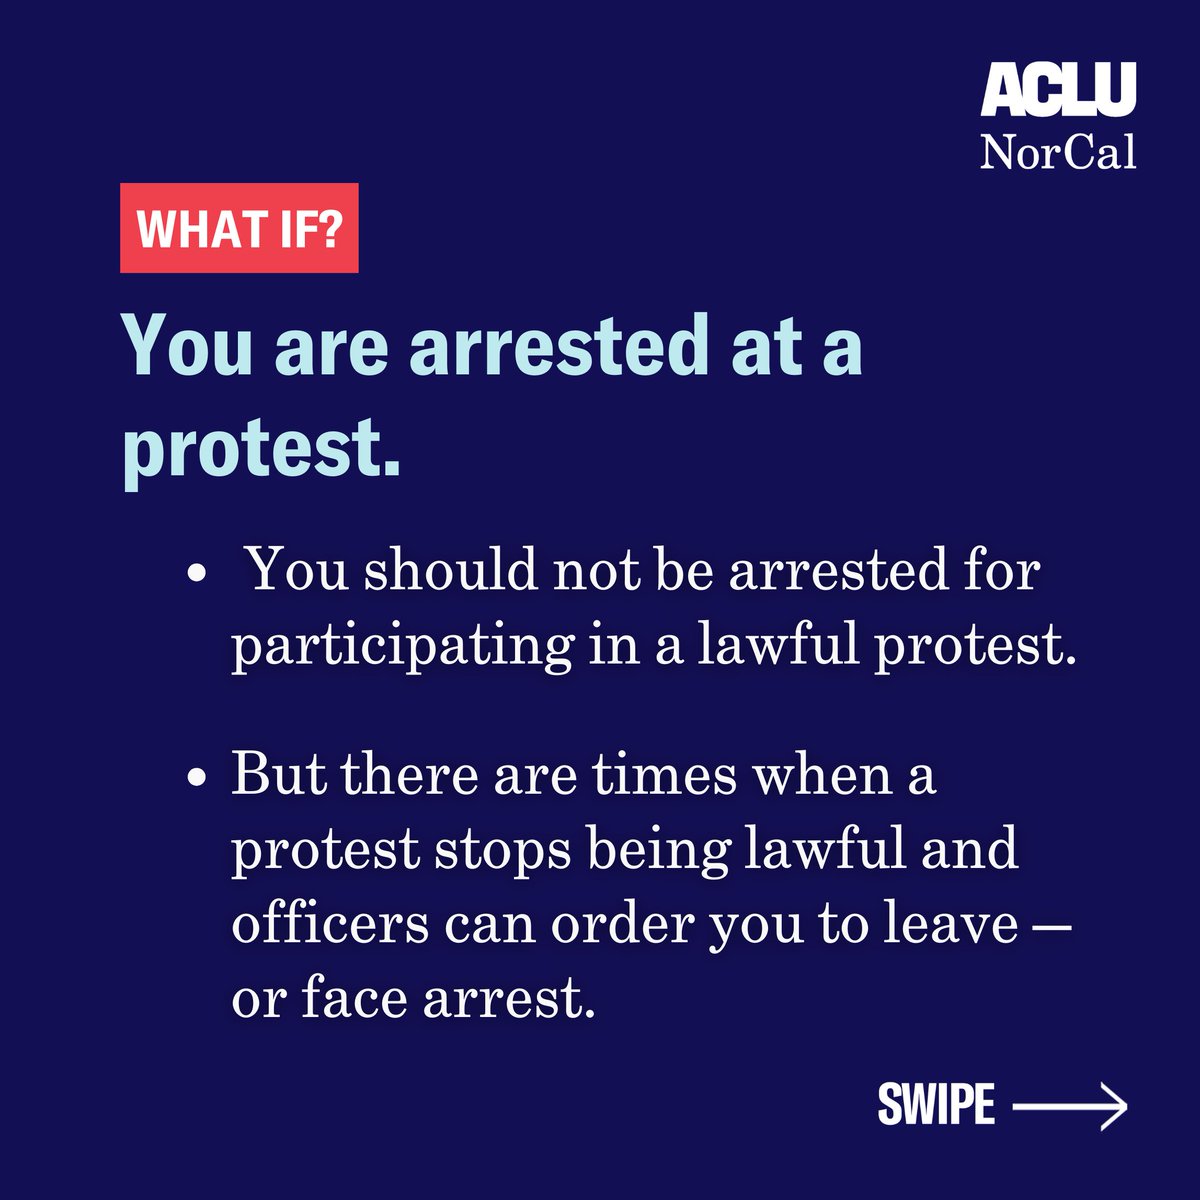 ACLU_NorCal tweet picture